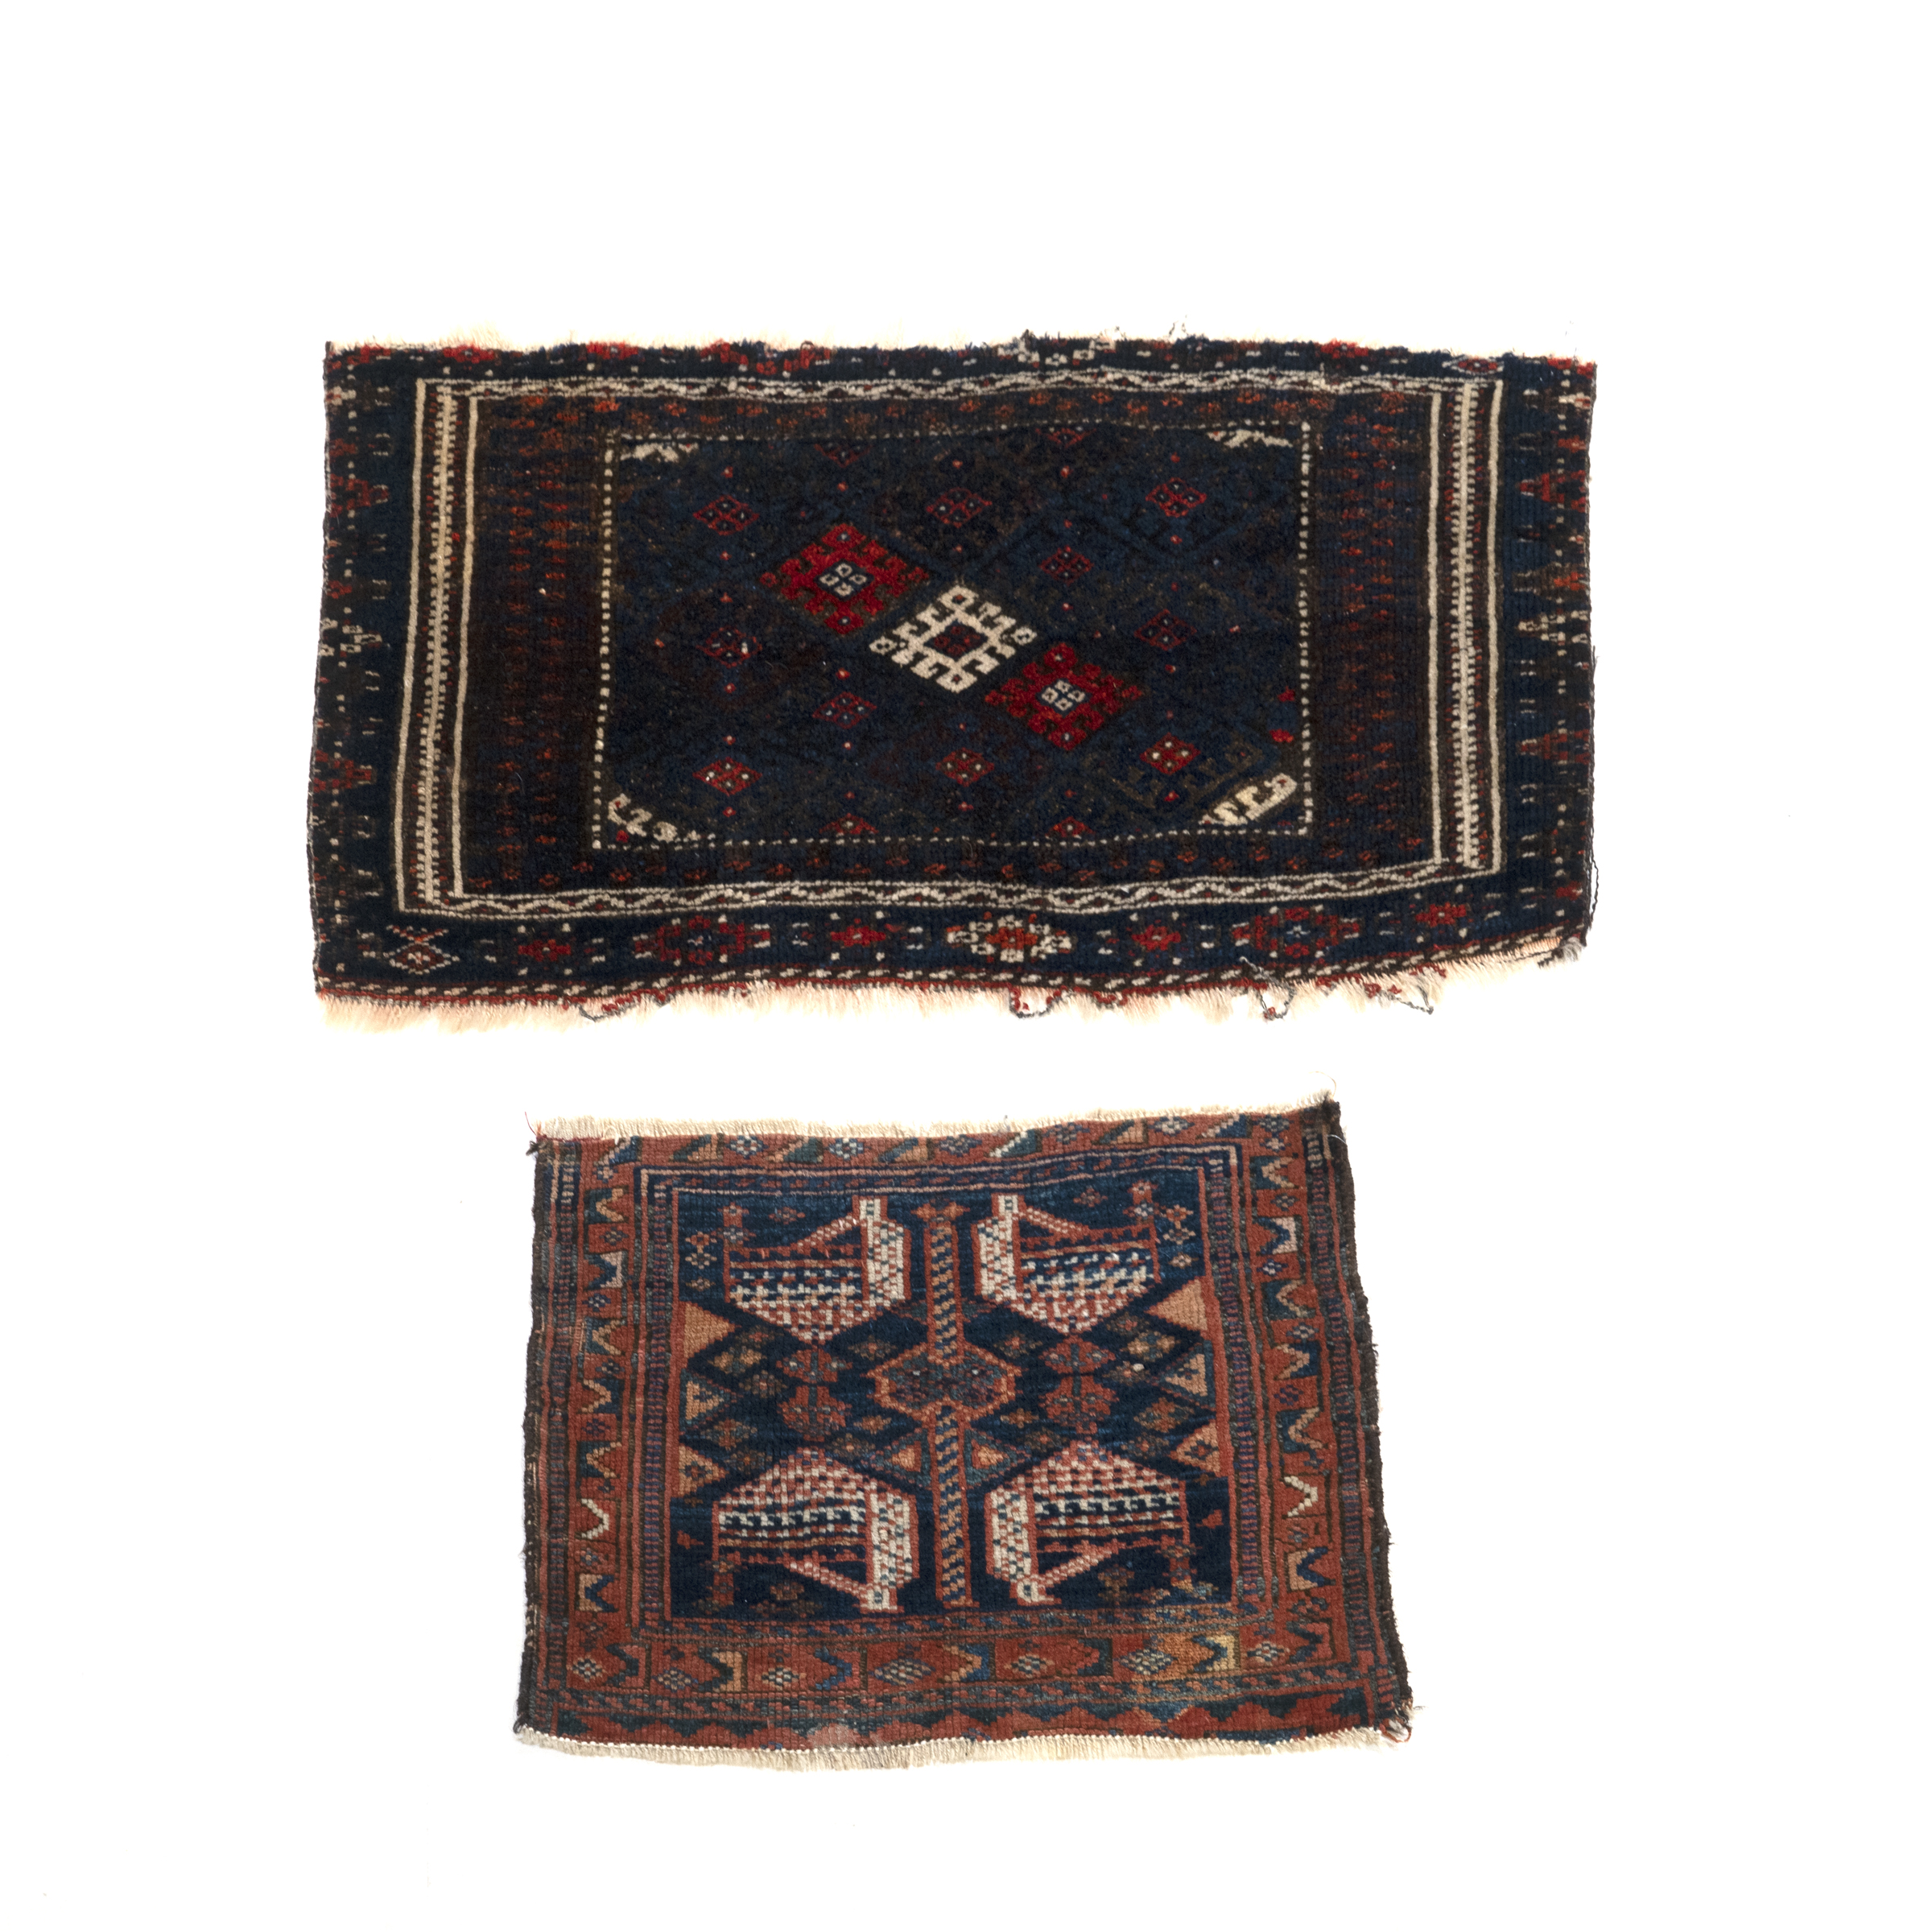 Jaff Kurd Bag Face, Persian together with a North West Persian Bag Face, both early 20th century